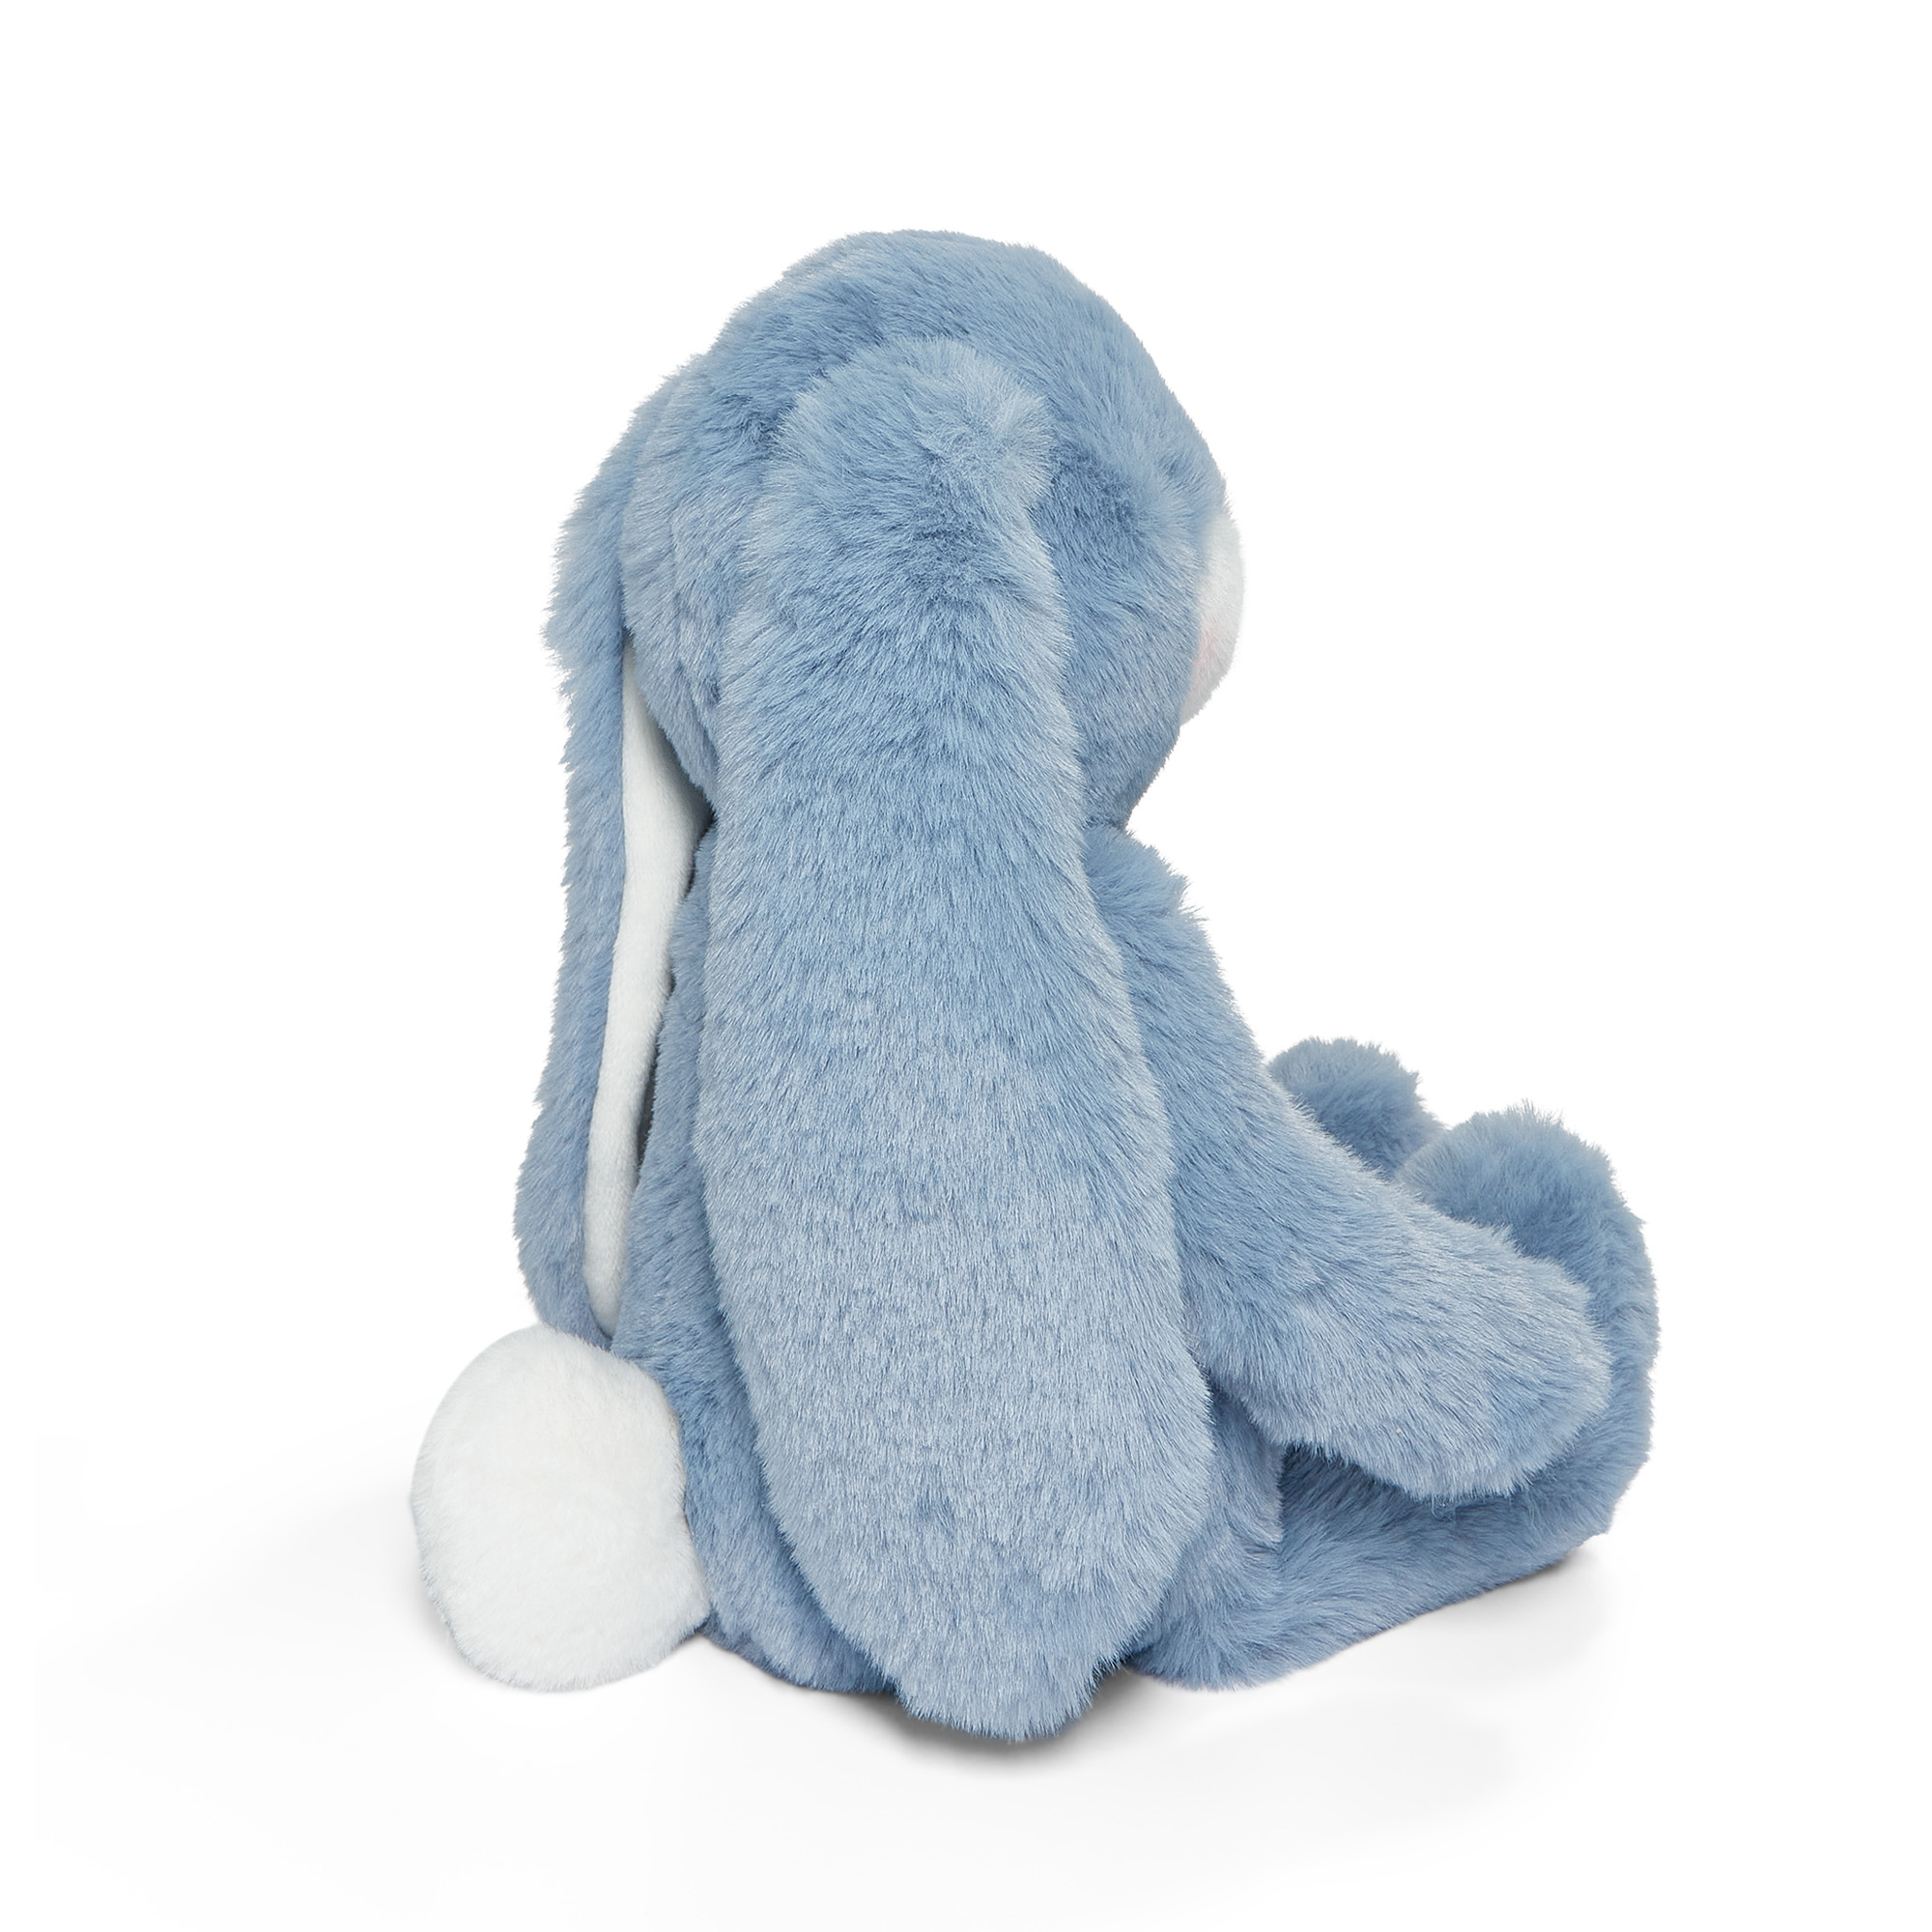 Peluche Little Nibble Spa Blue Bunny 30 cm - Bunnies By The Bay